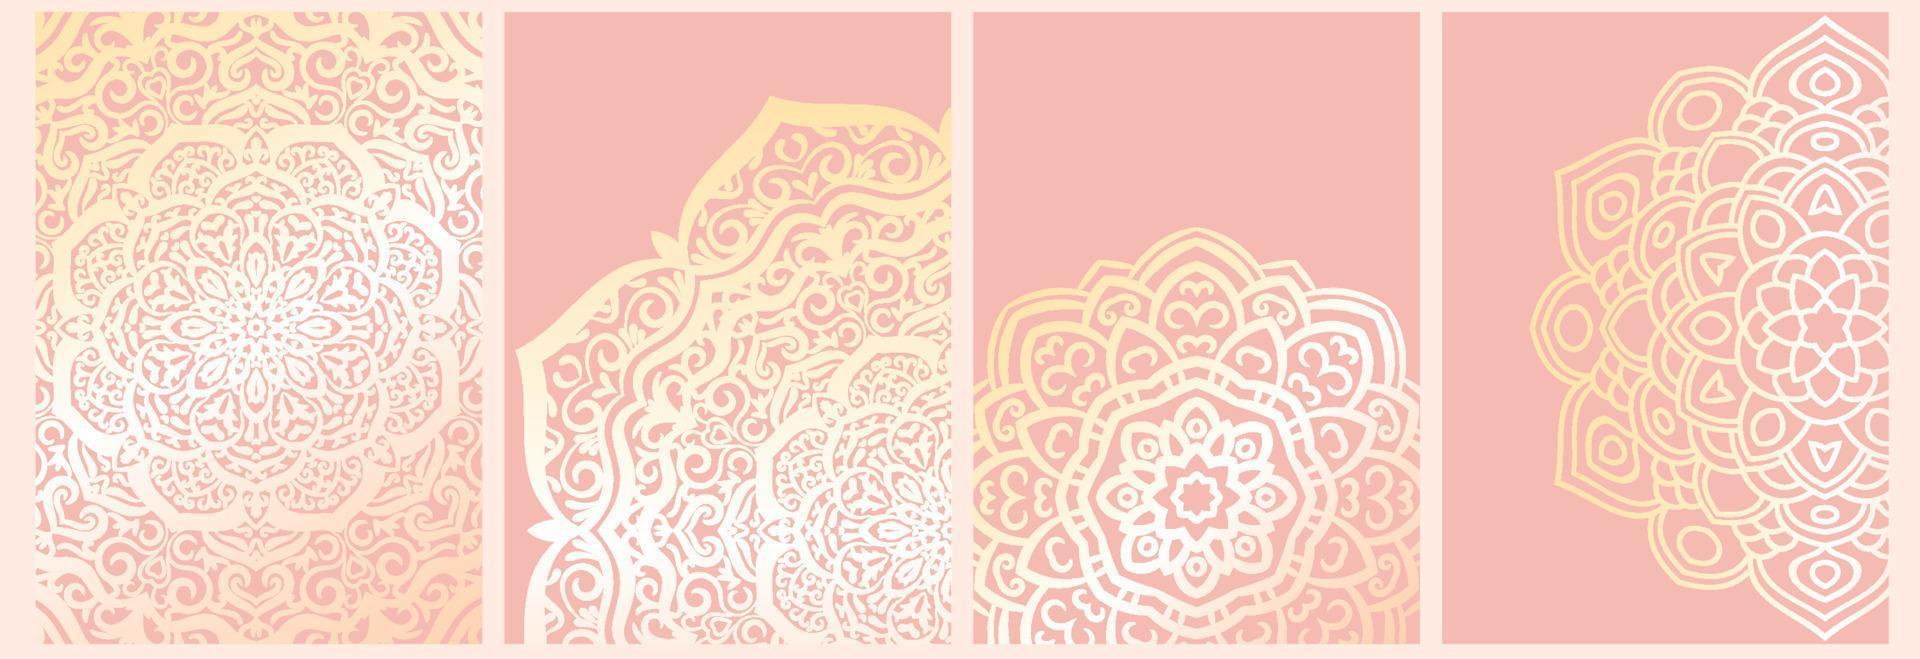 Set of mandala backgrounds isolated on pink. Banner, flyer, card with ornamental flowers. vector